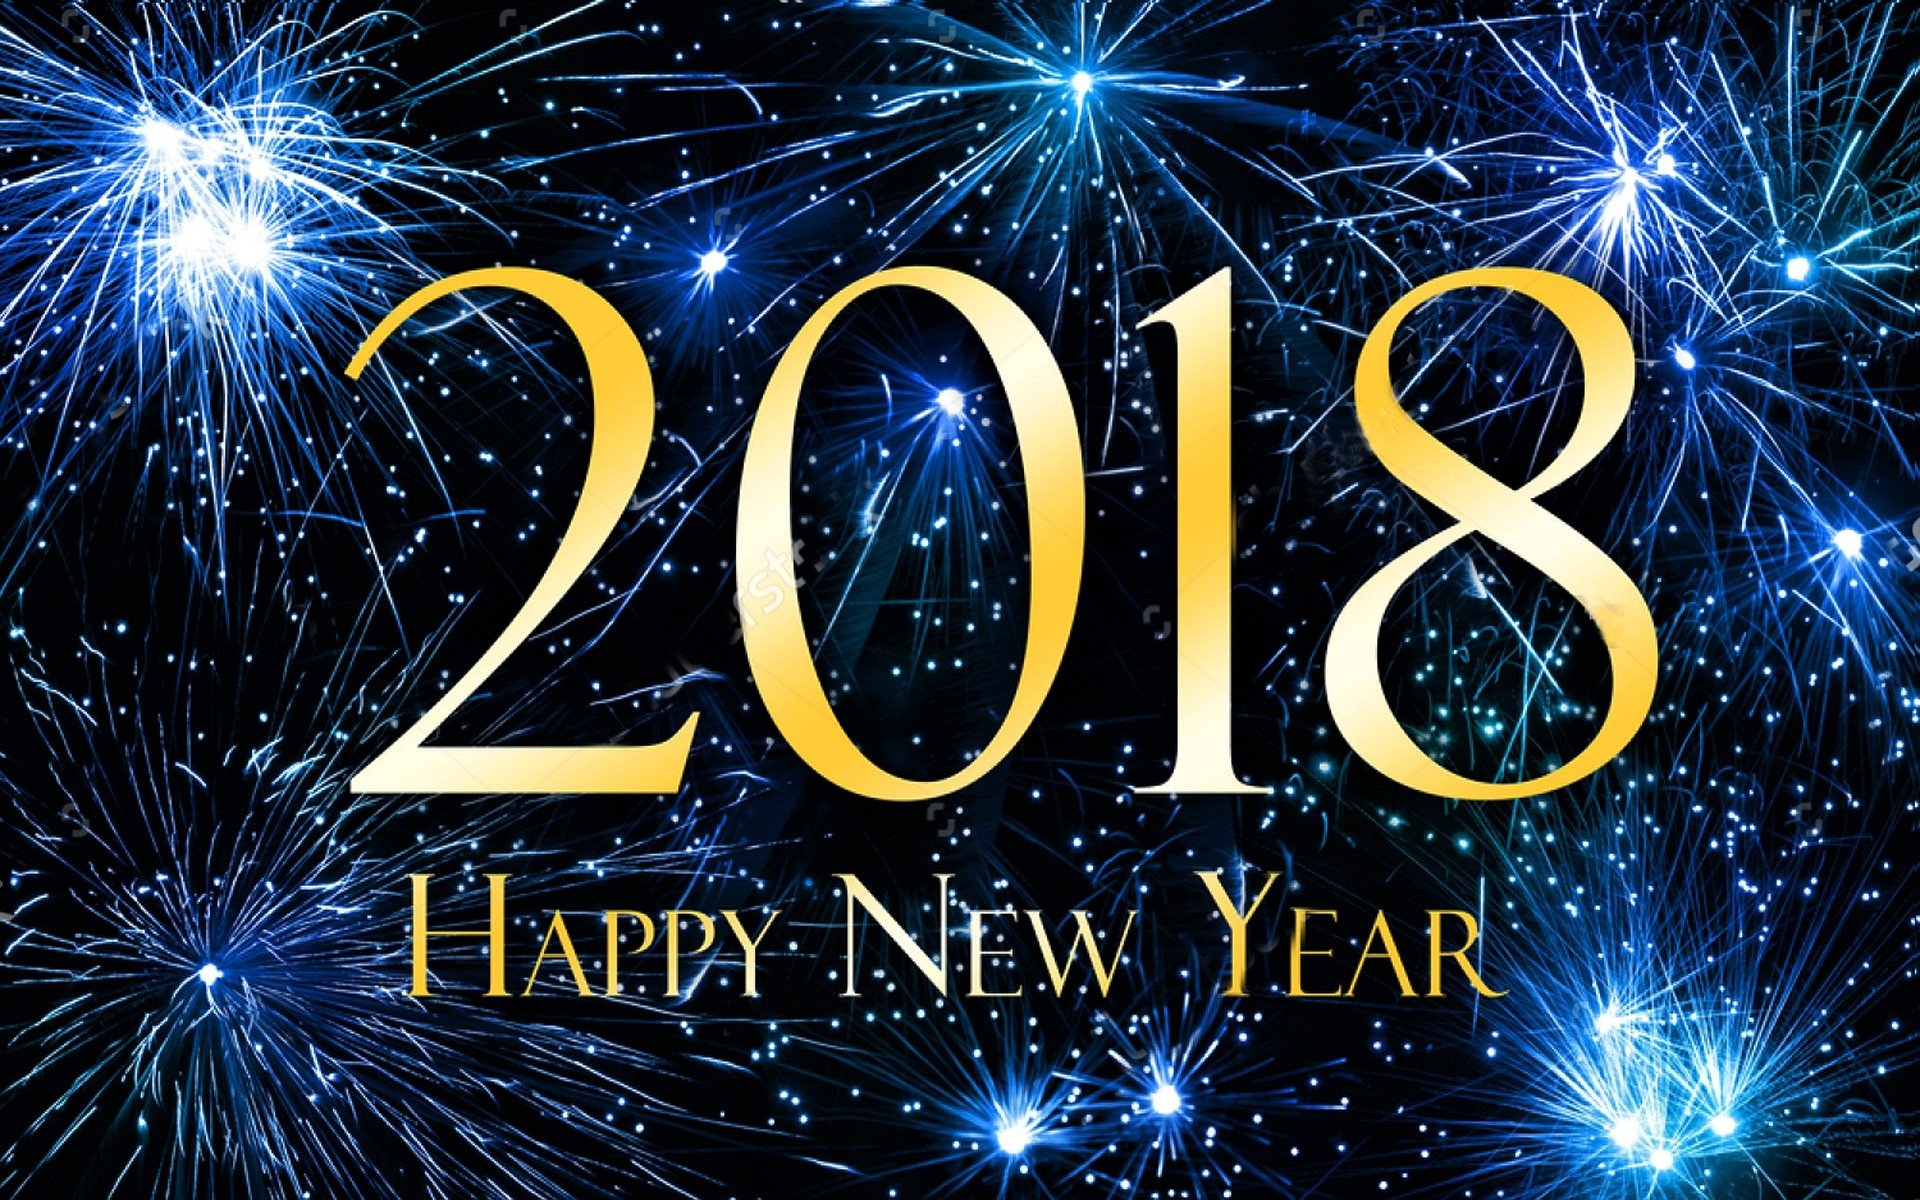 happy new year 2018 wallpapers,fireworks,new year,new years day,text,holiday